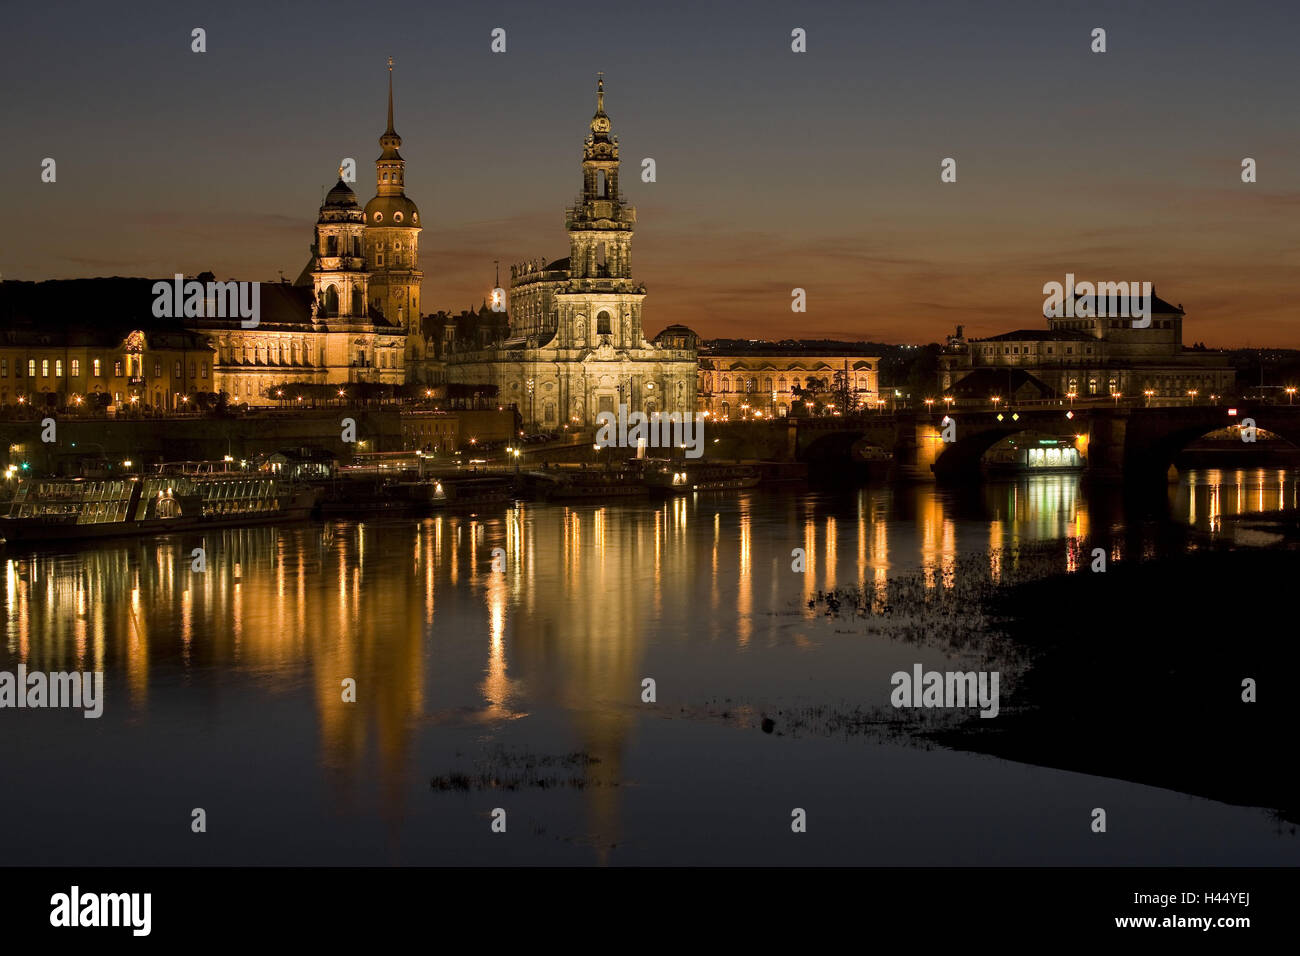 Germany, Saxony, Dresden, Old Town, panorama, the Elbe, lights, mirroring, night, Stock Photo